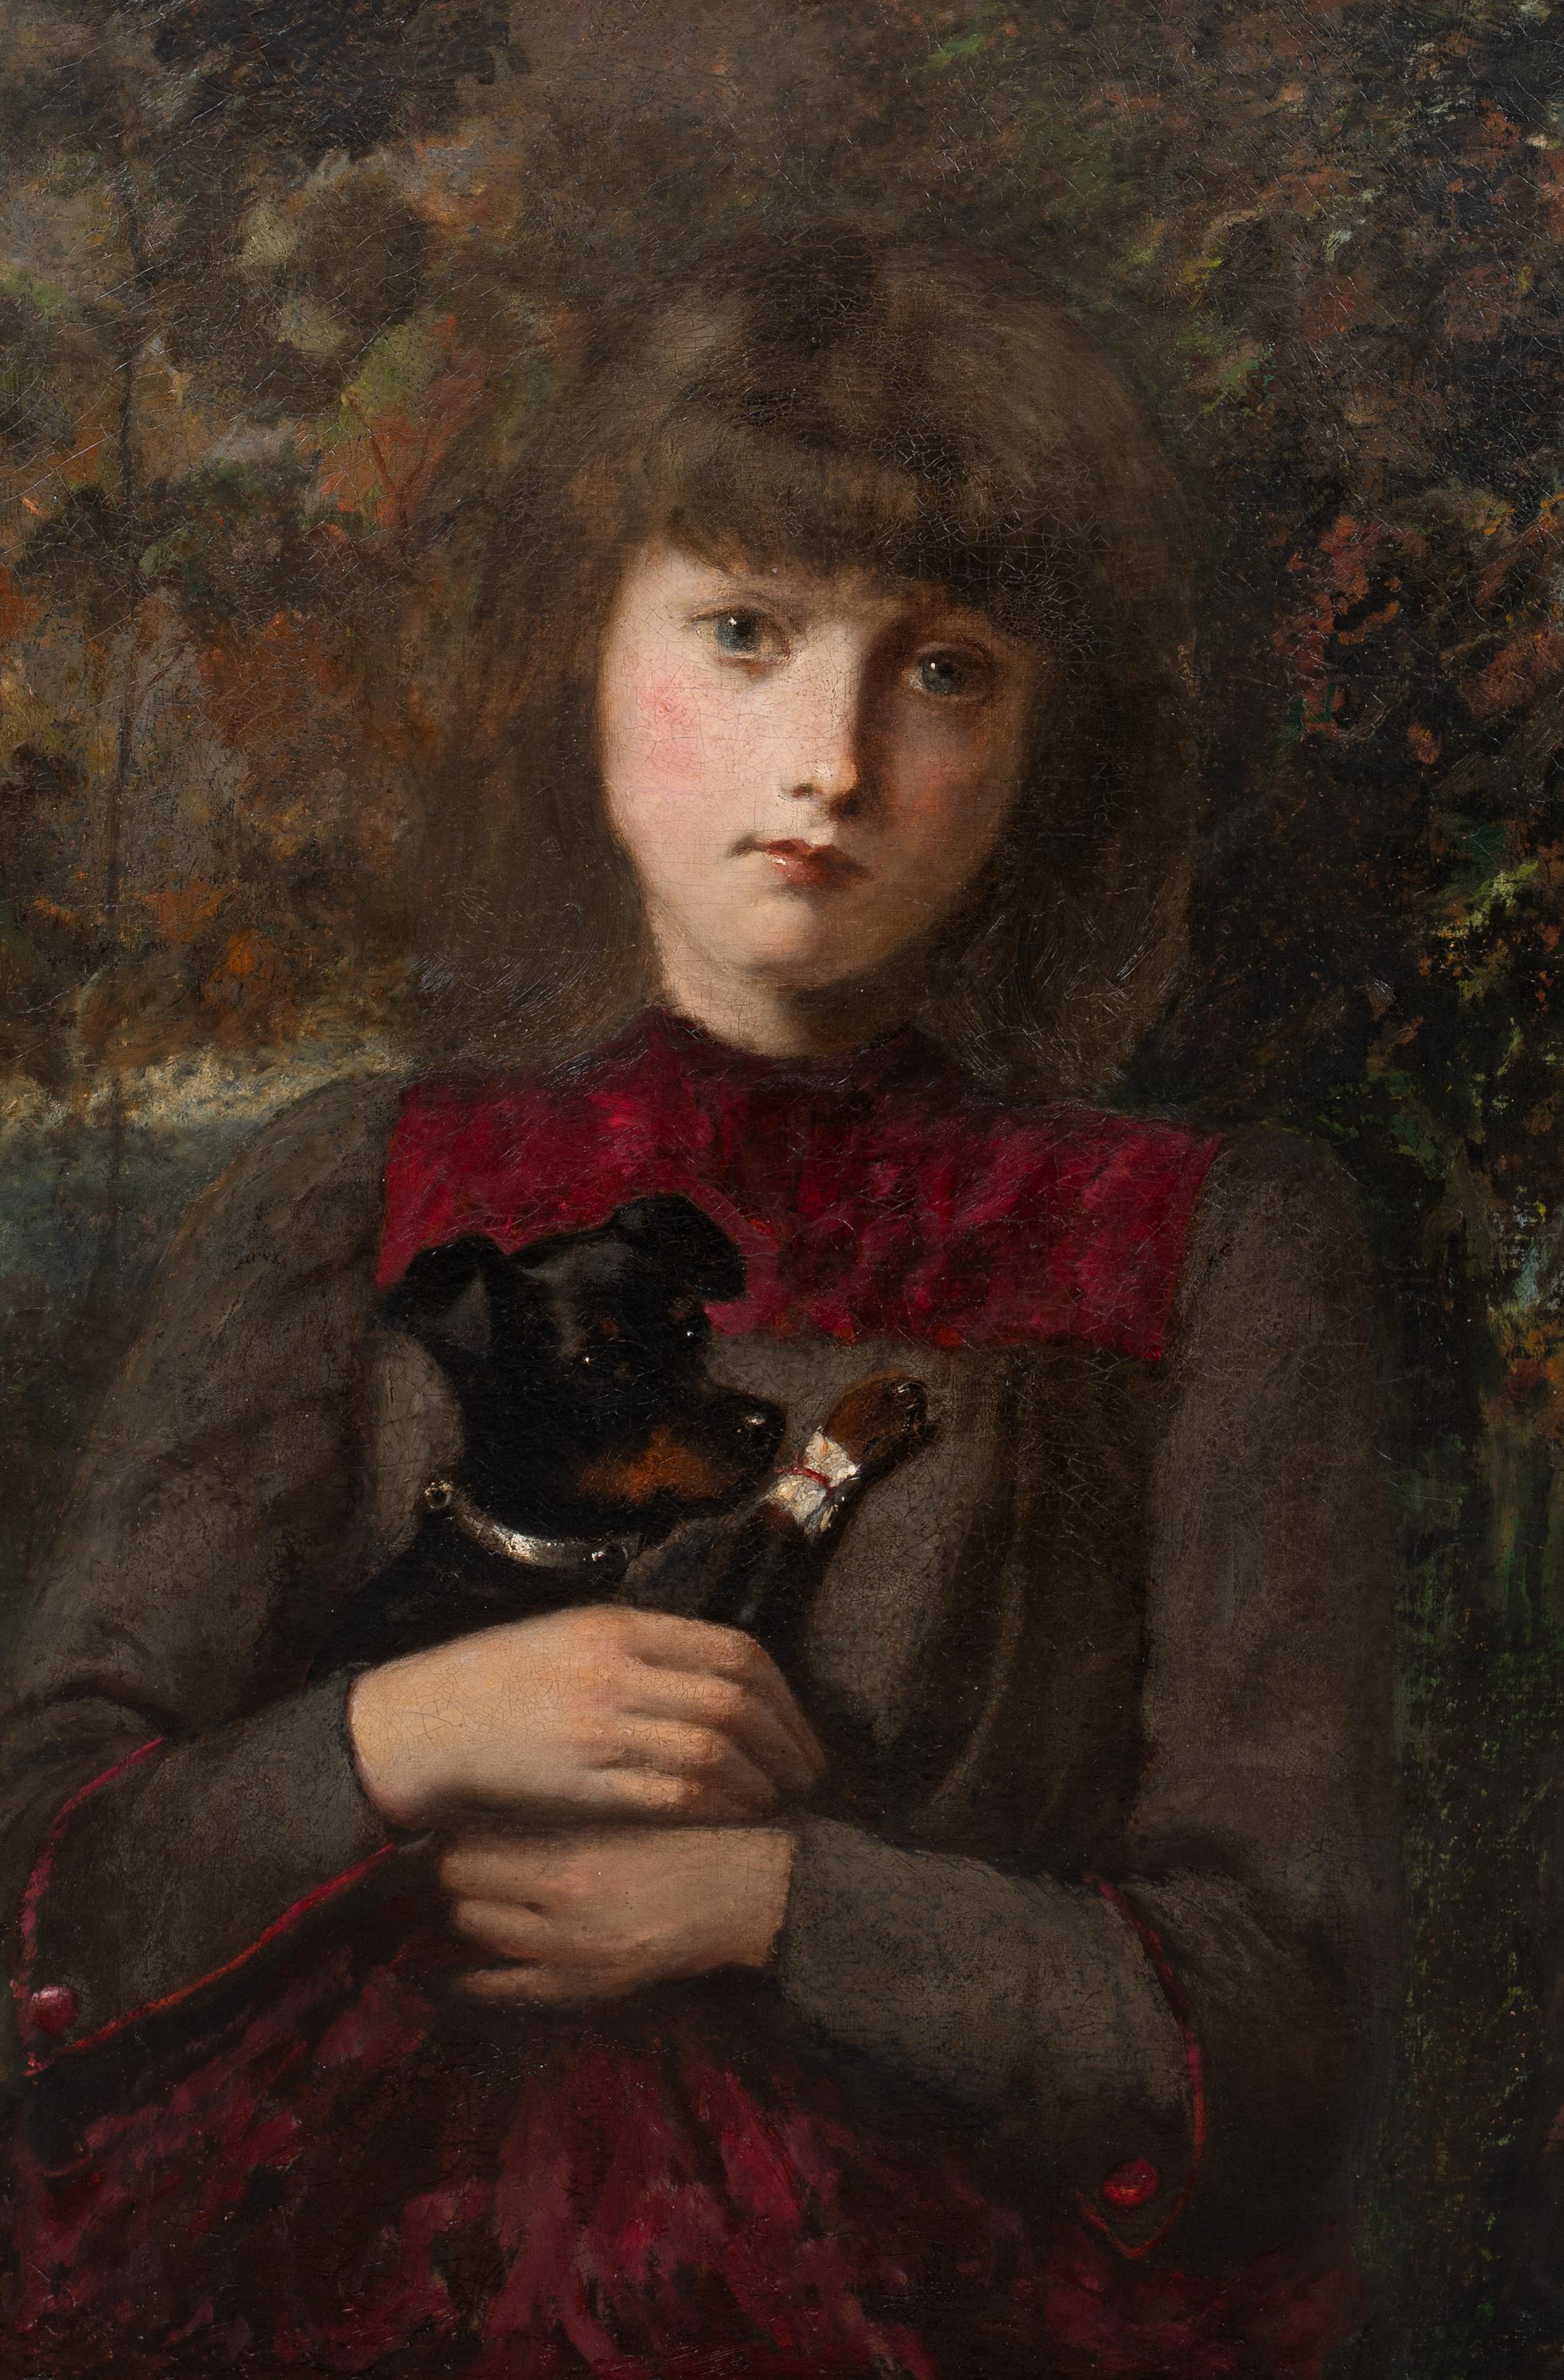 The Injured Companion, 19th Century 

English School

Large 19th Century English School portrait of a young girl holding an injured puppy, oil on canvas. Beautifully painted and endearing scene circa 1880. Presented in a good reed gilt